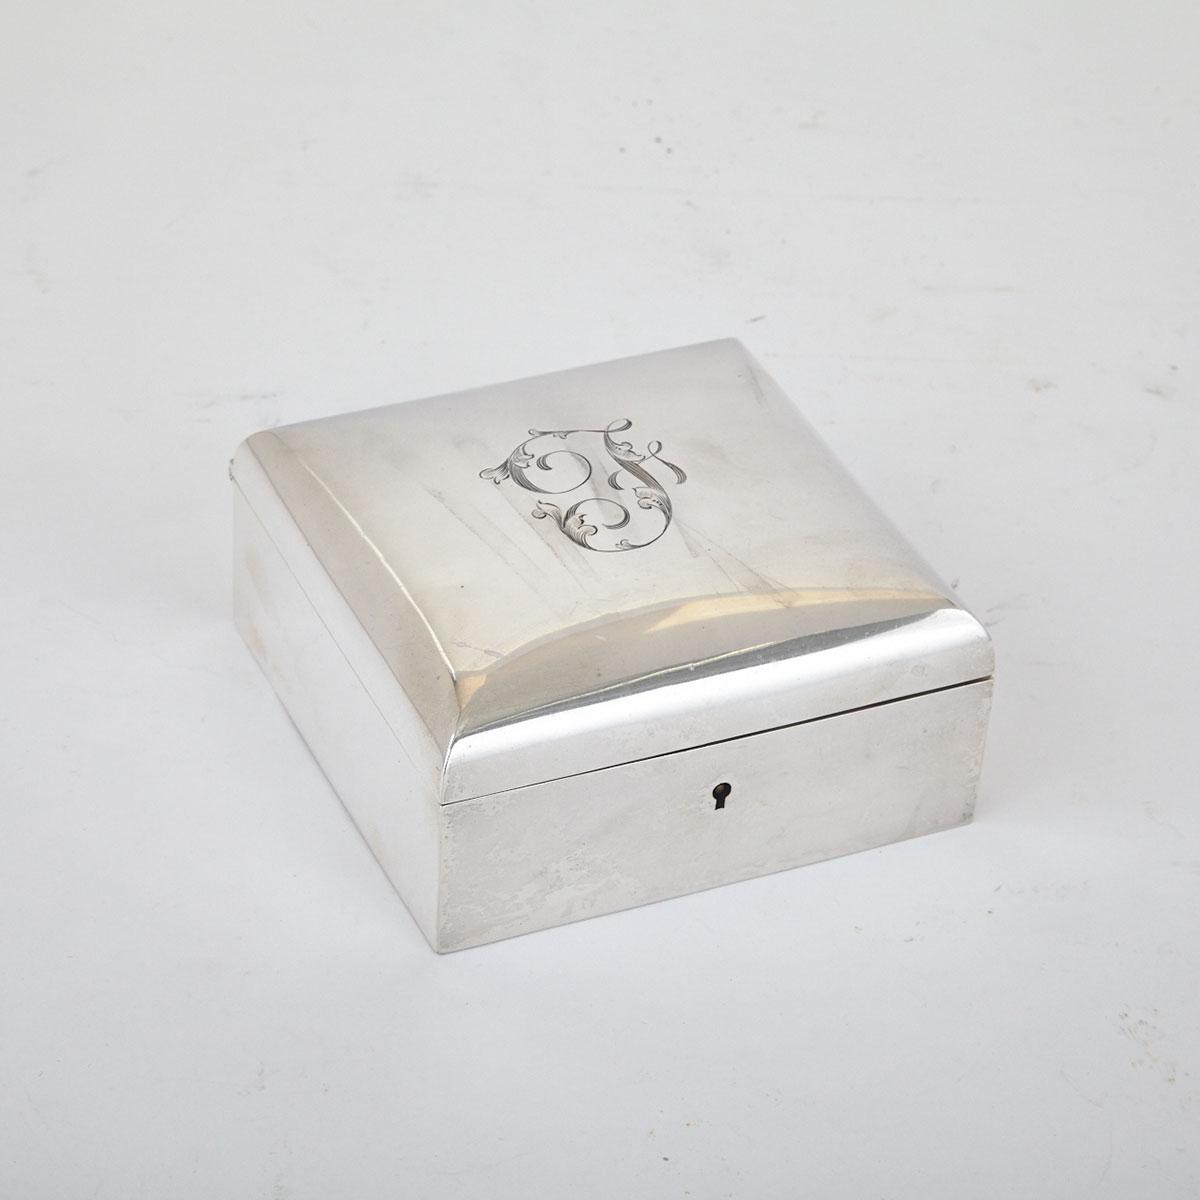 Canadian Silver Jewellery Box, Henry Birks & Sons, Montreal, Que., early 20th century